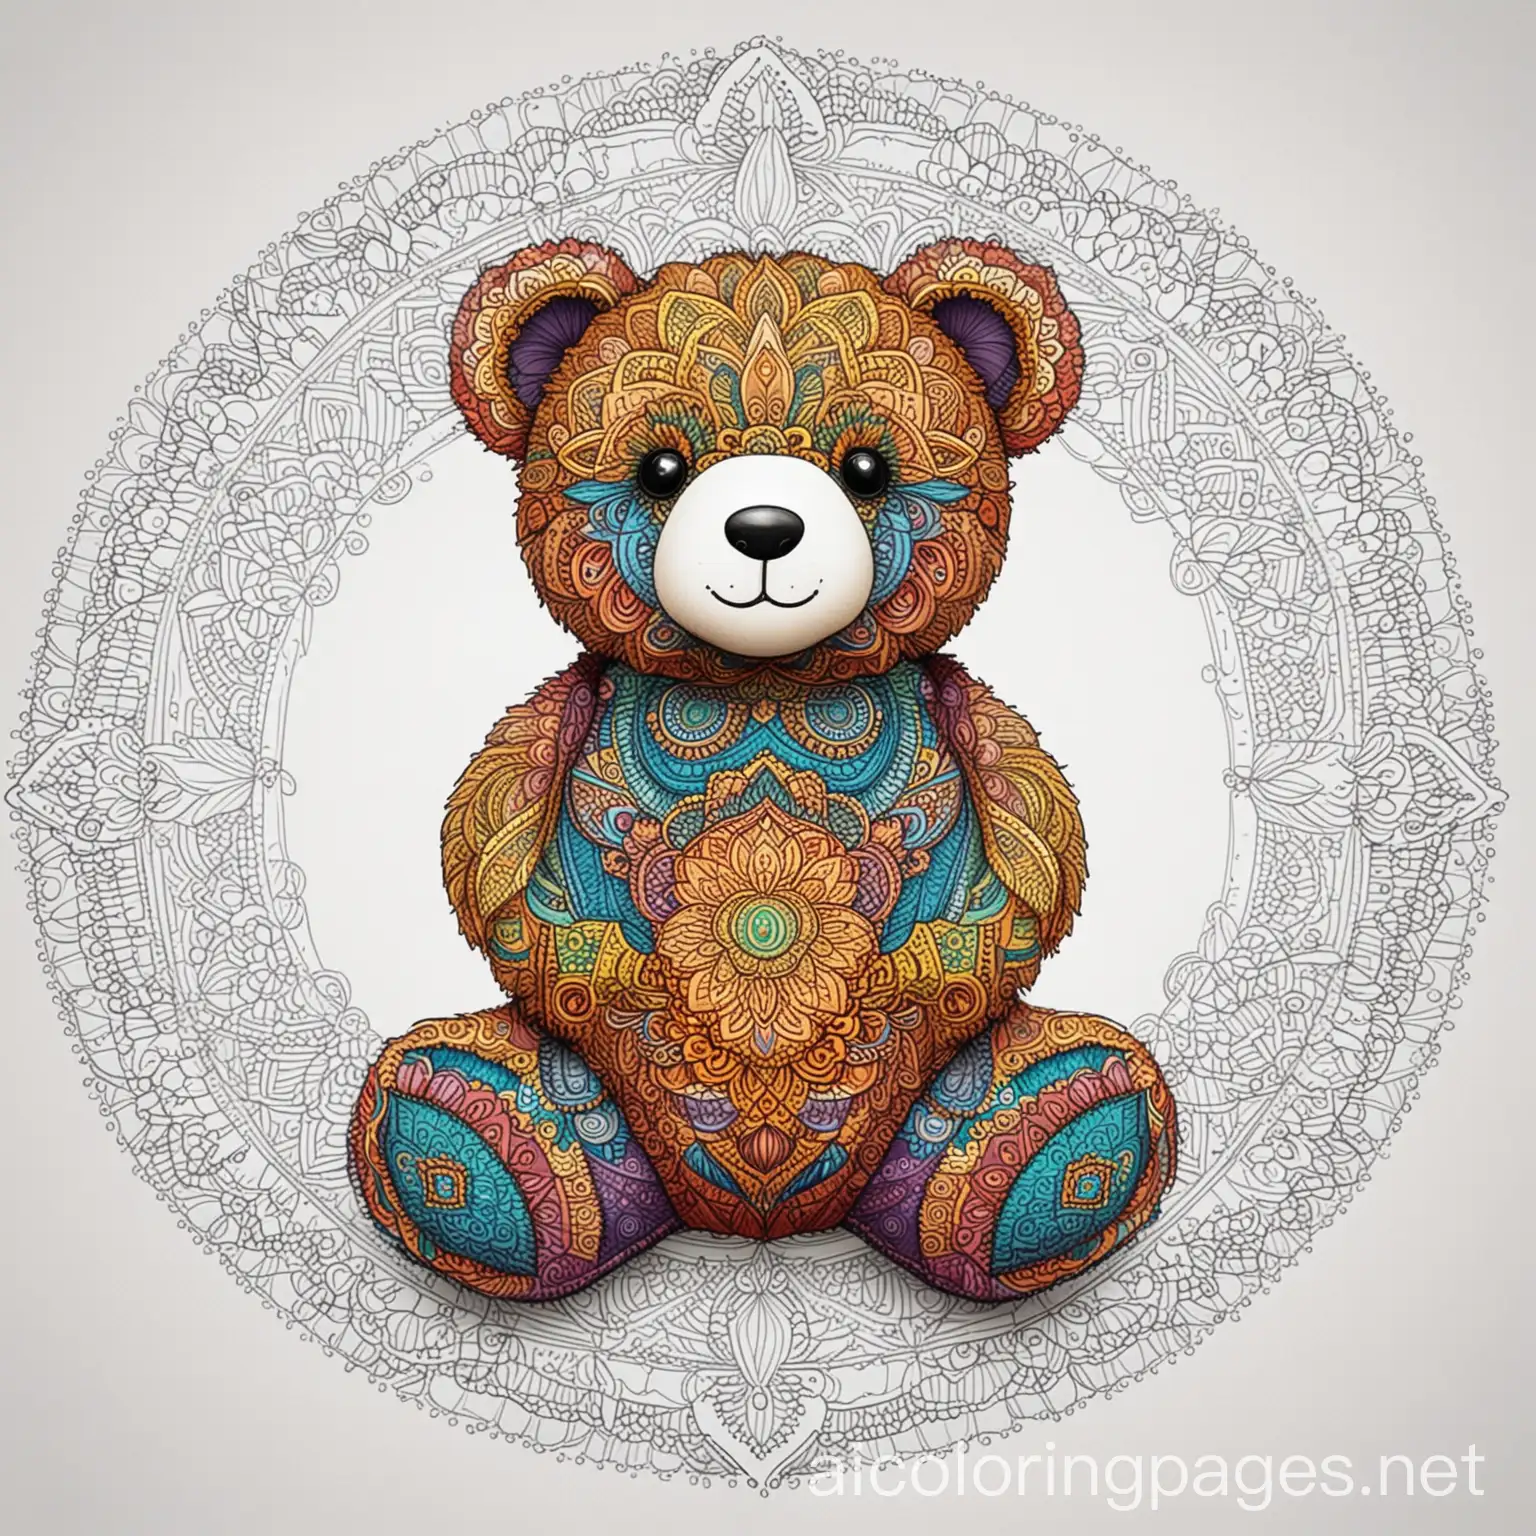 Coloring-Page-of-Mandala-Teddy-Bear-on-White-Background